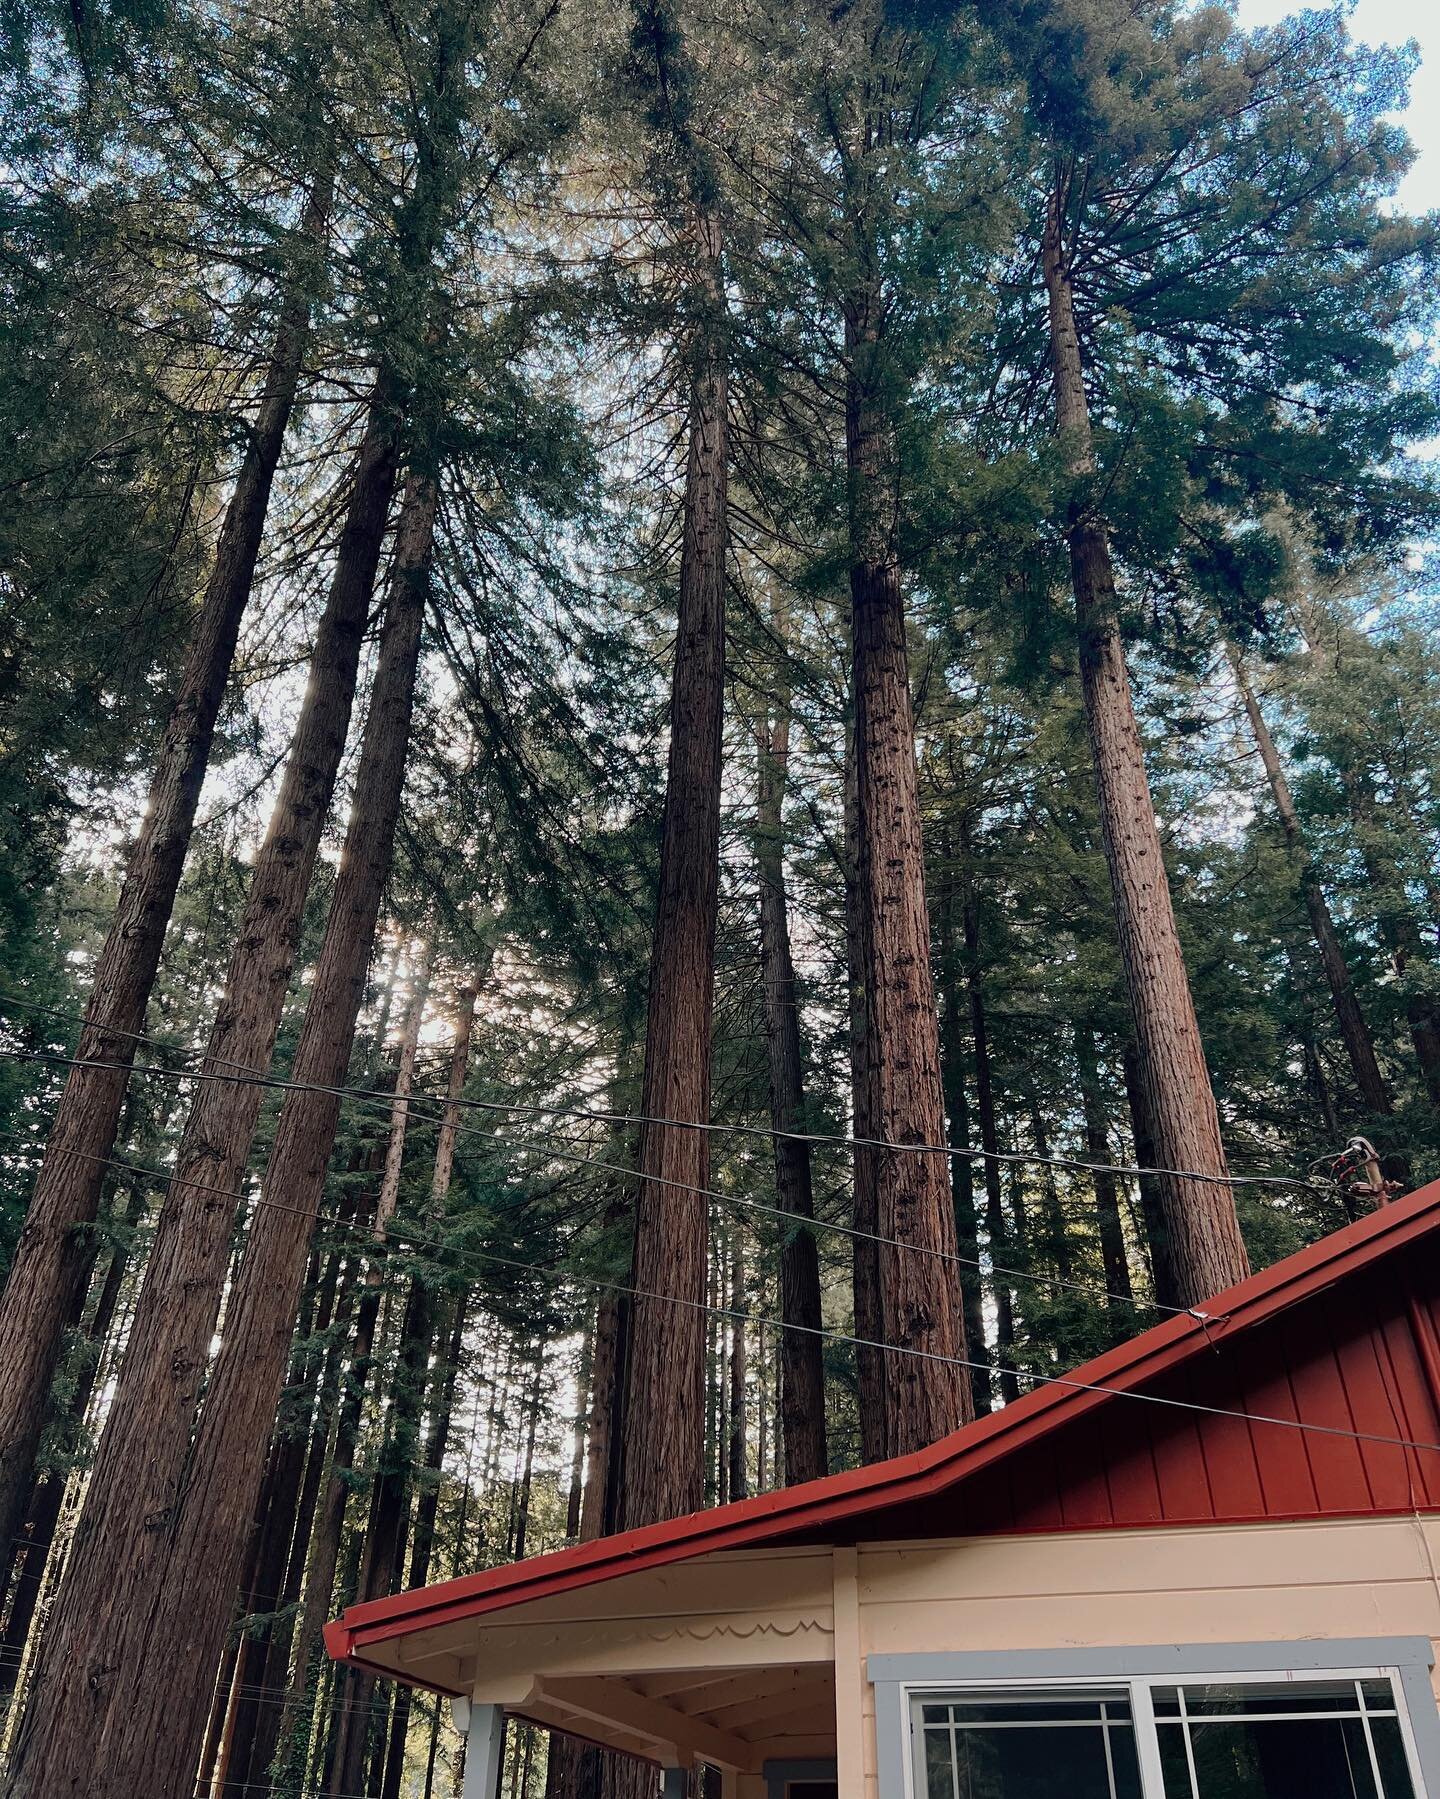 Drive an hour, sleep in a quiet place with the world&rsquo;s tallest trees where there is no cell service.